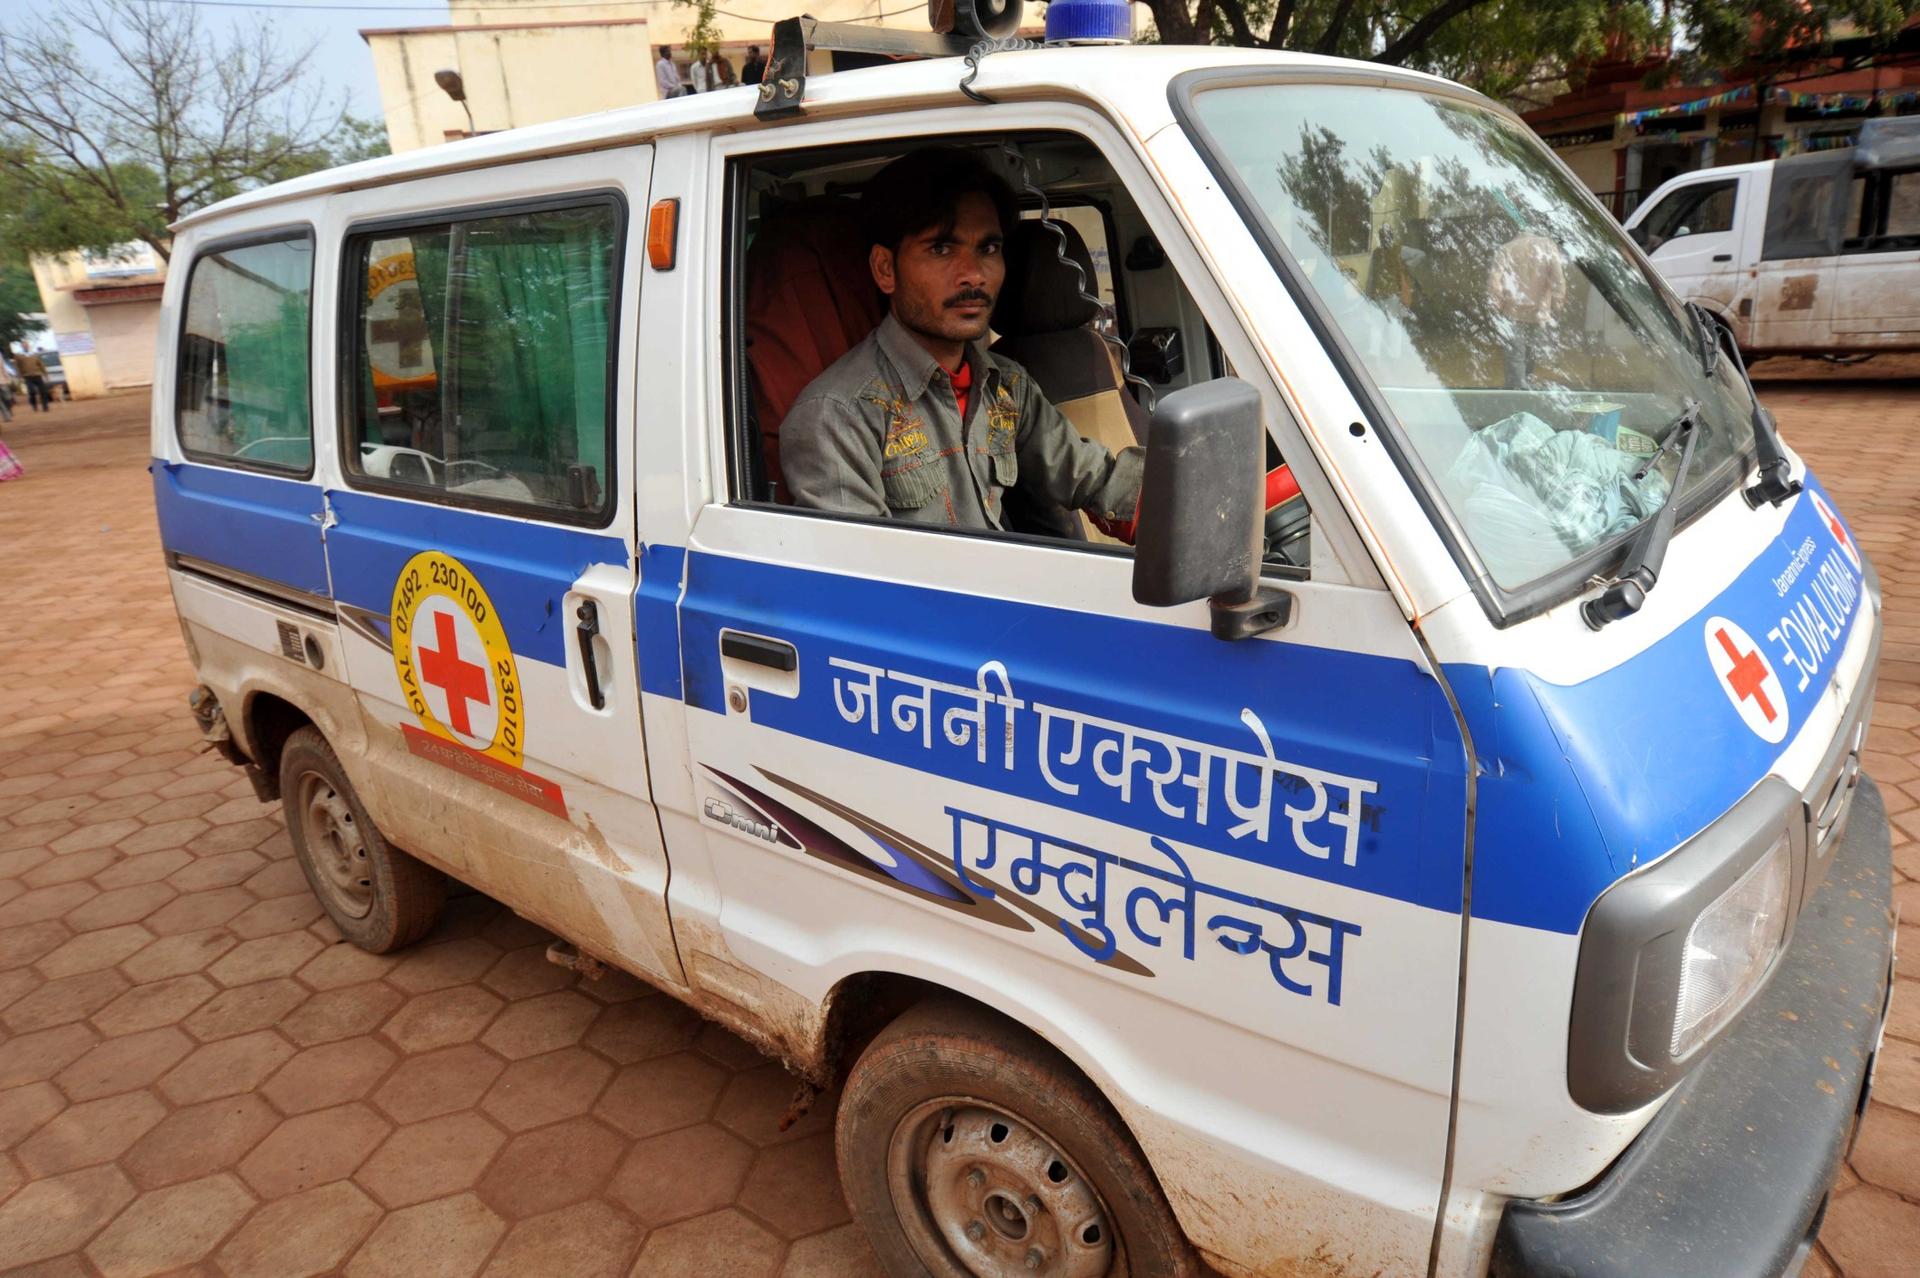 A Janani Express ambulance. Janani means “mother” in Hindi, and the ambulance service transports pregnant women to health centers to give birth.